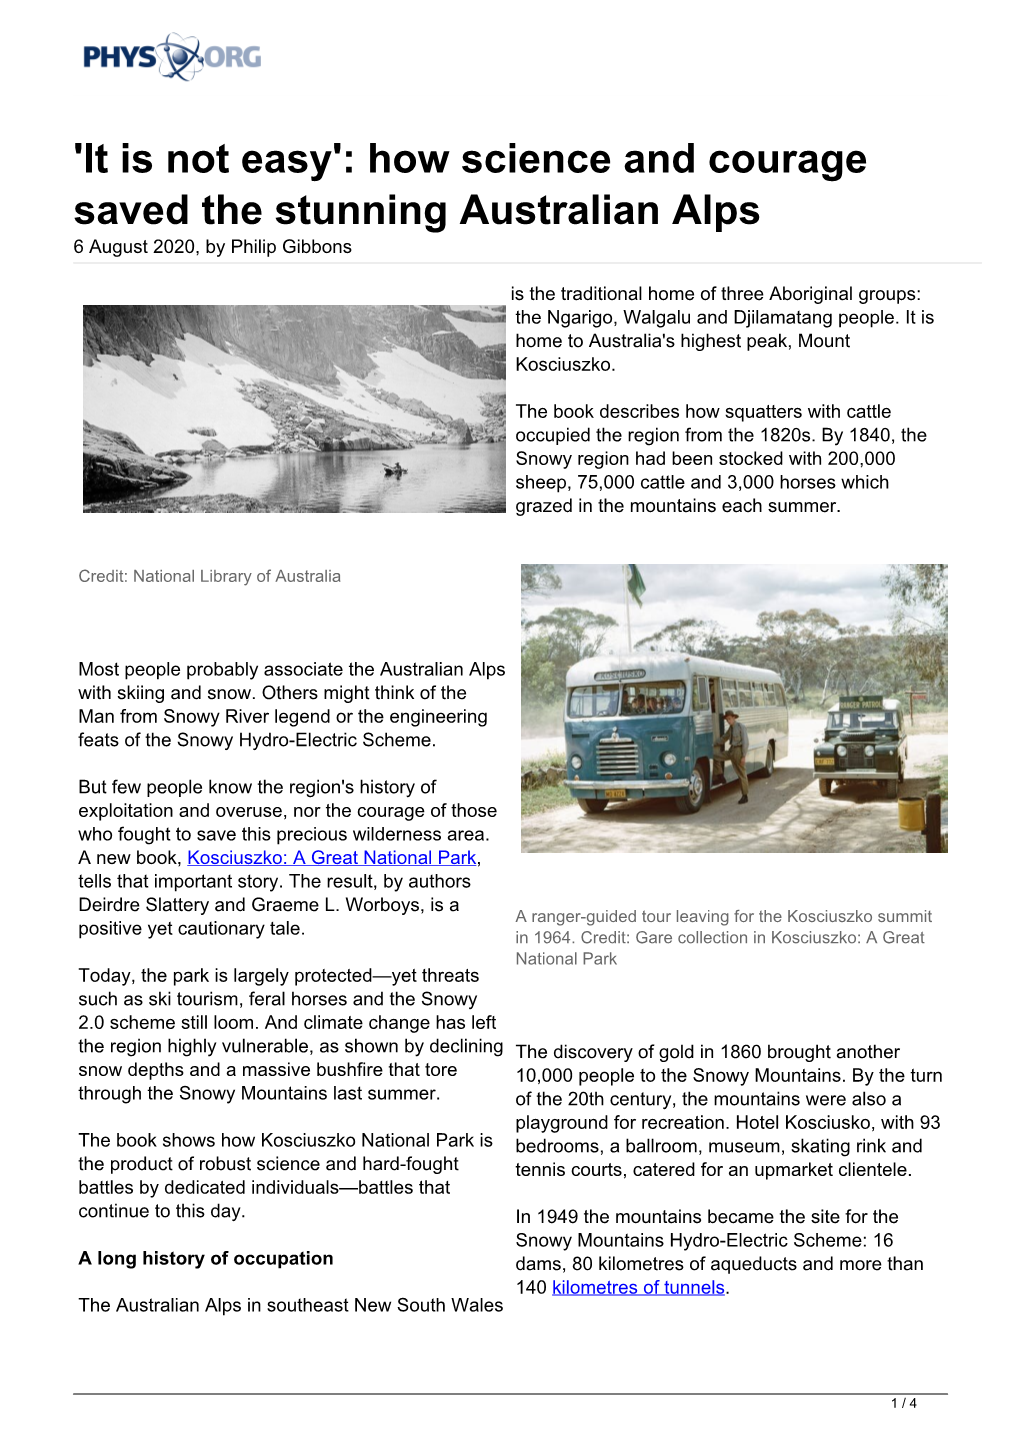 How Science and Courage Saved the Stunning Australian Alps 6 August 2020, by Philip Gibbons